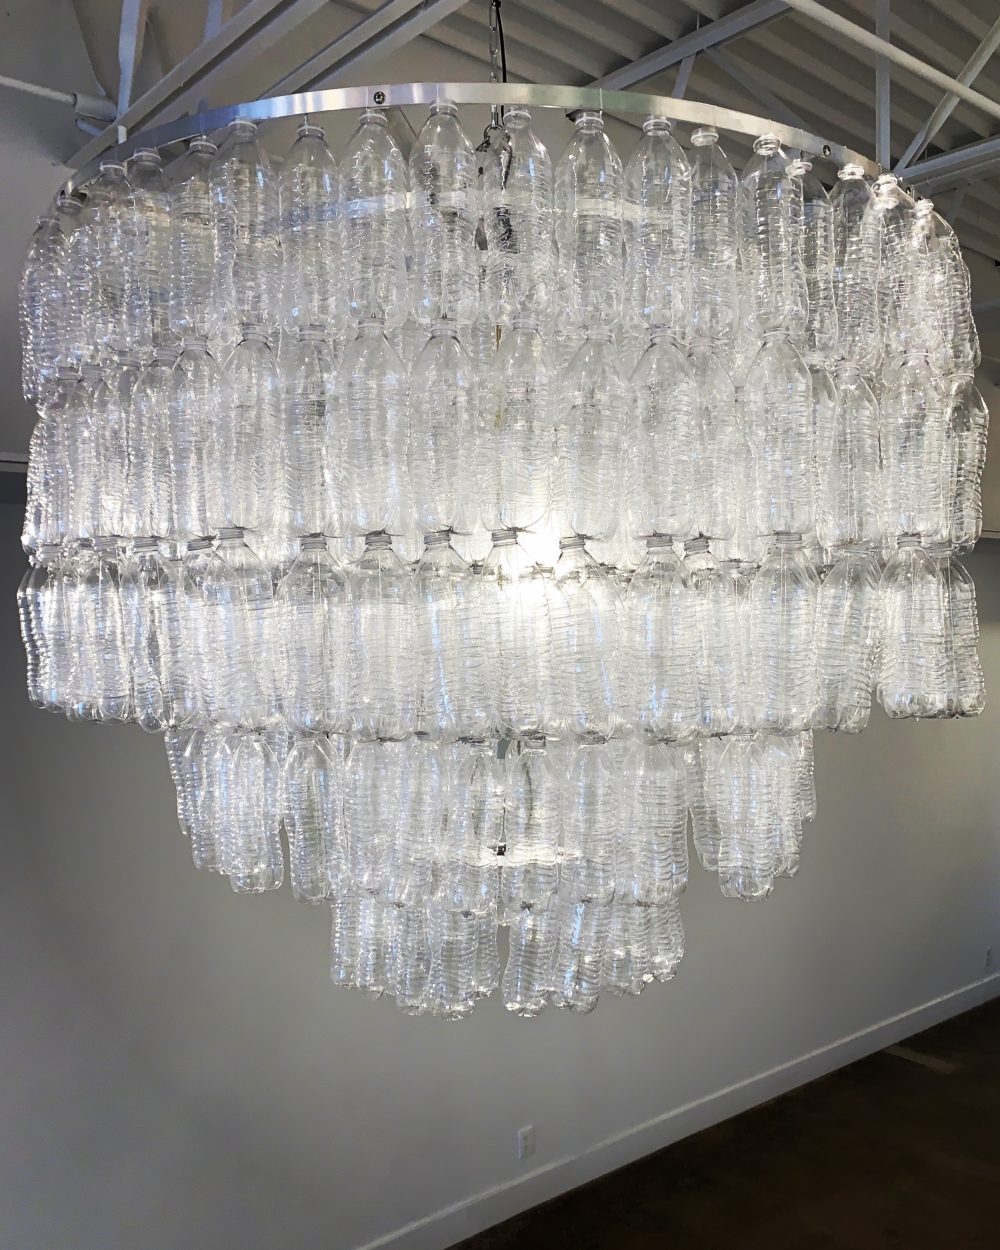 chandelier made from found plastic bottles on the beach by shelia rogers | Felder Gallery